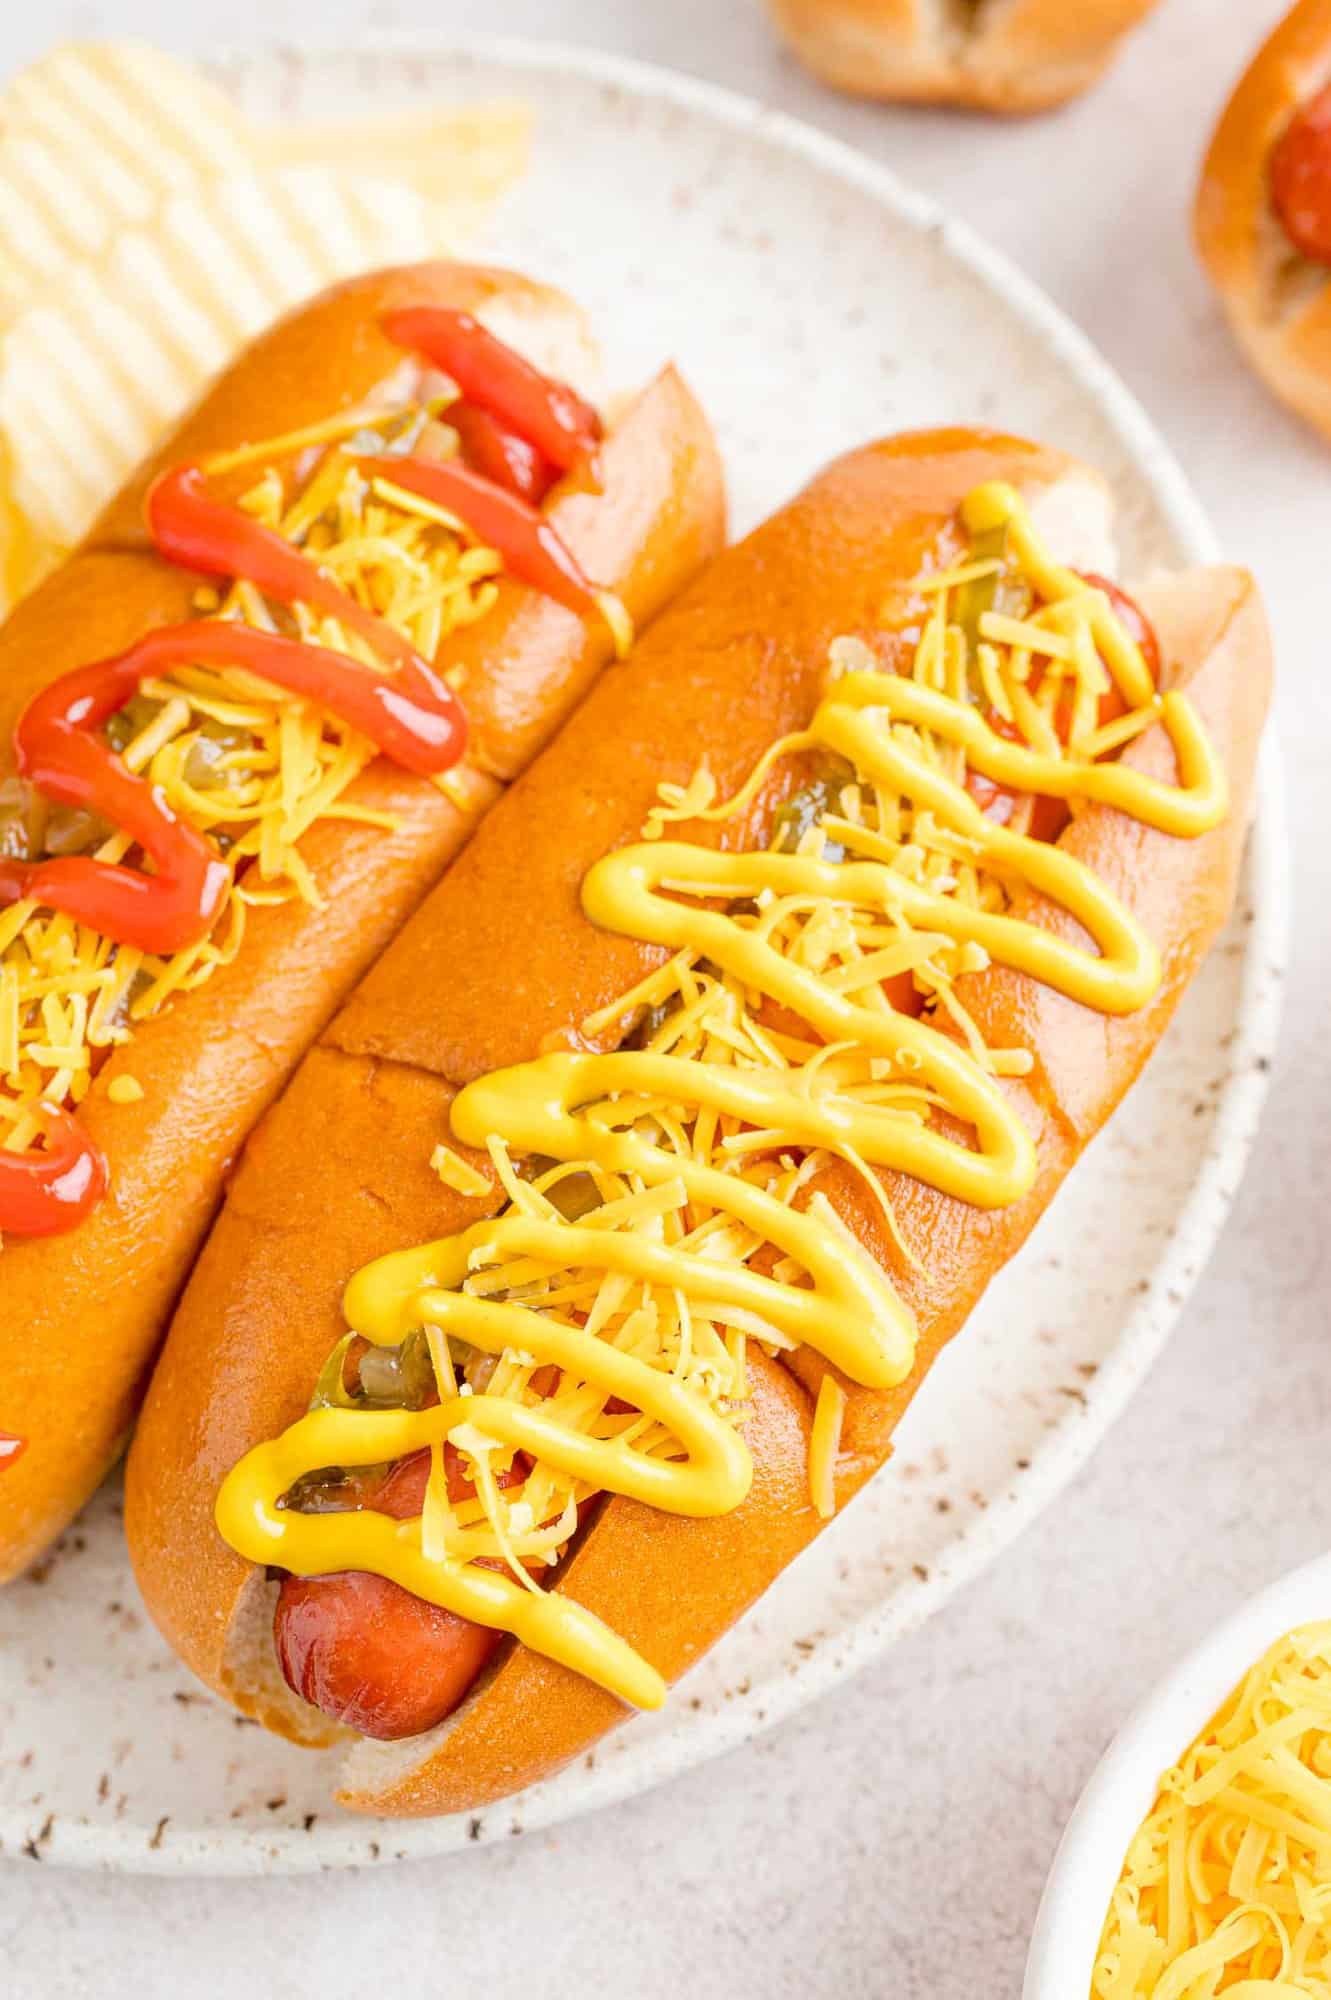 Hot dogs in buns with toppings.